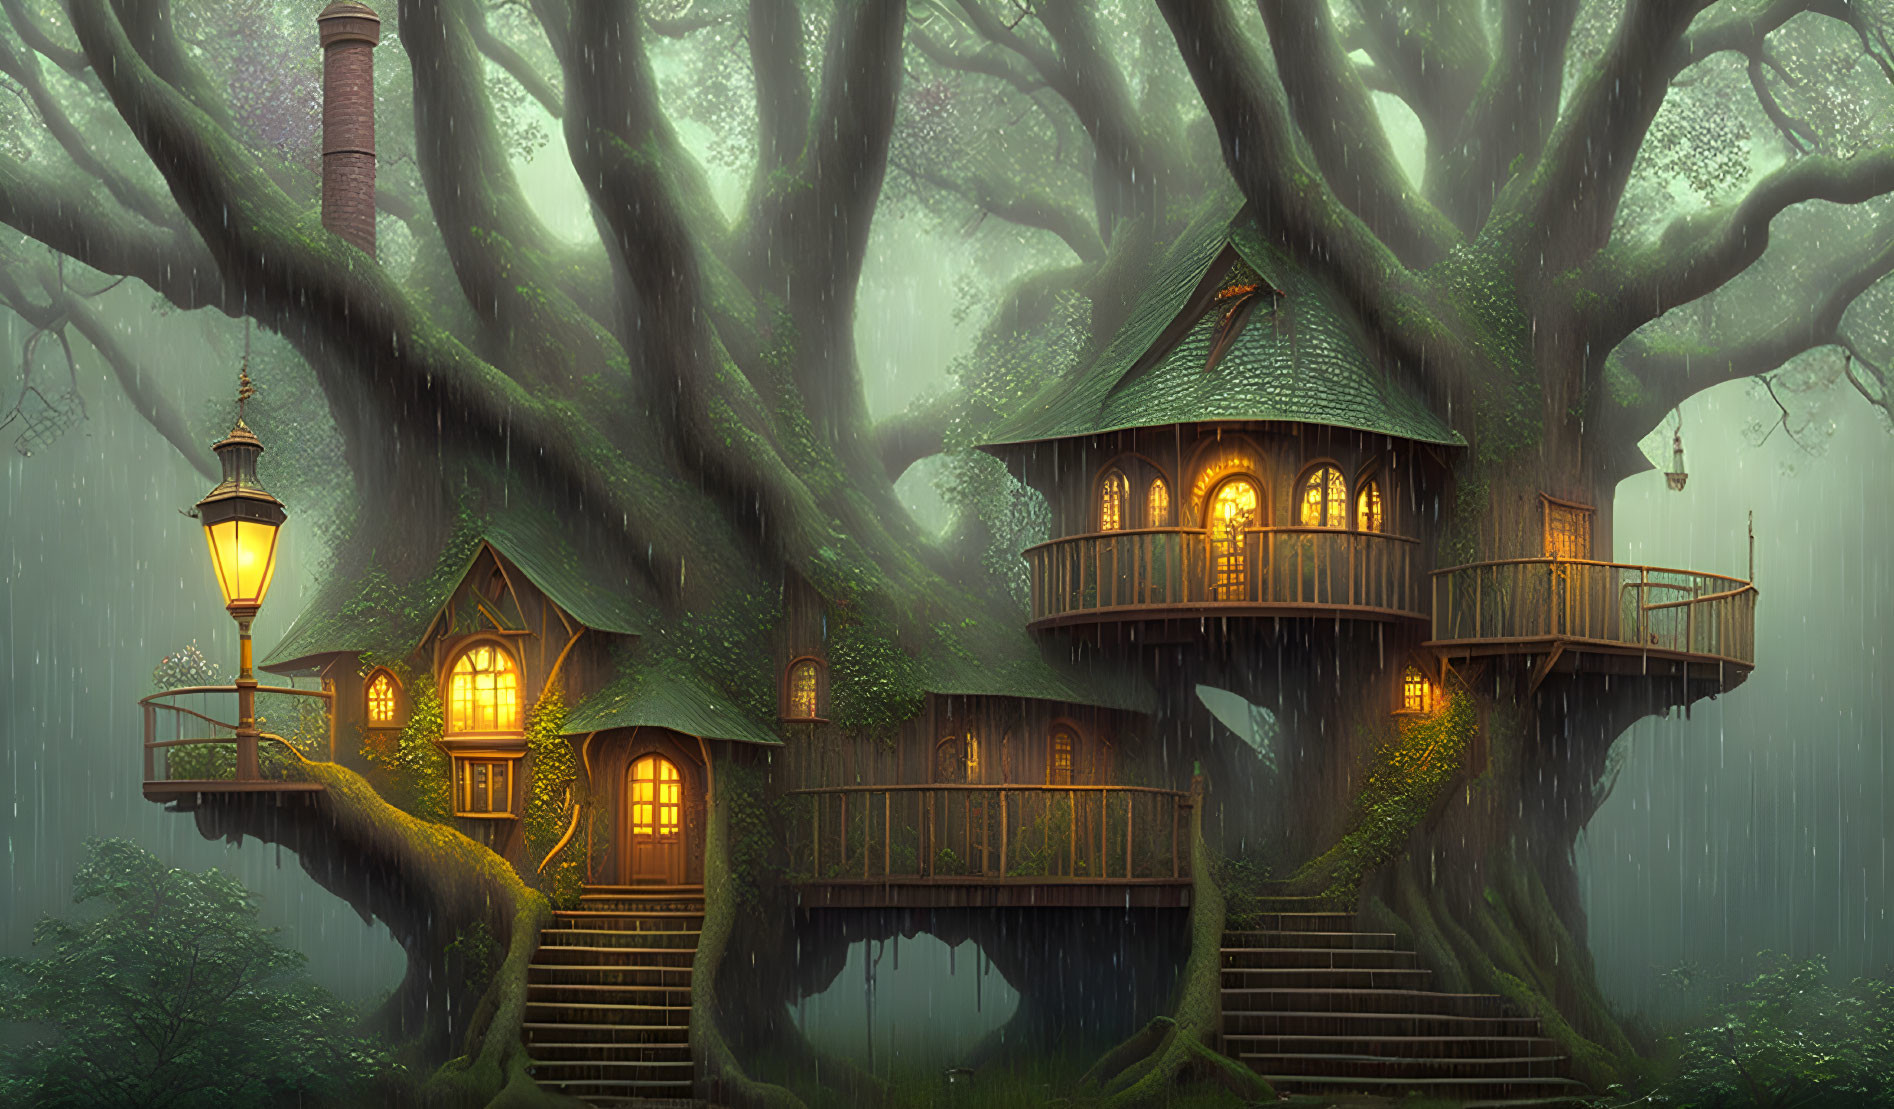 The old tree house in the pouring rain